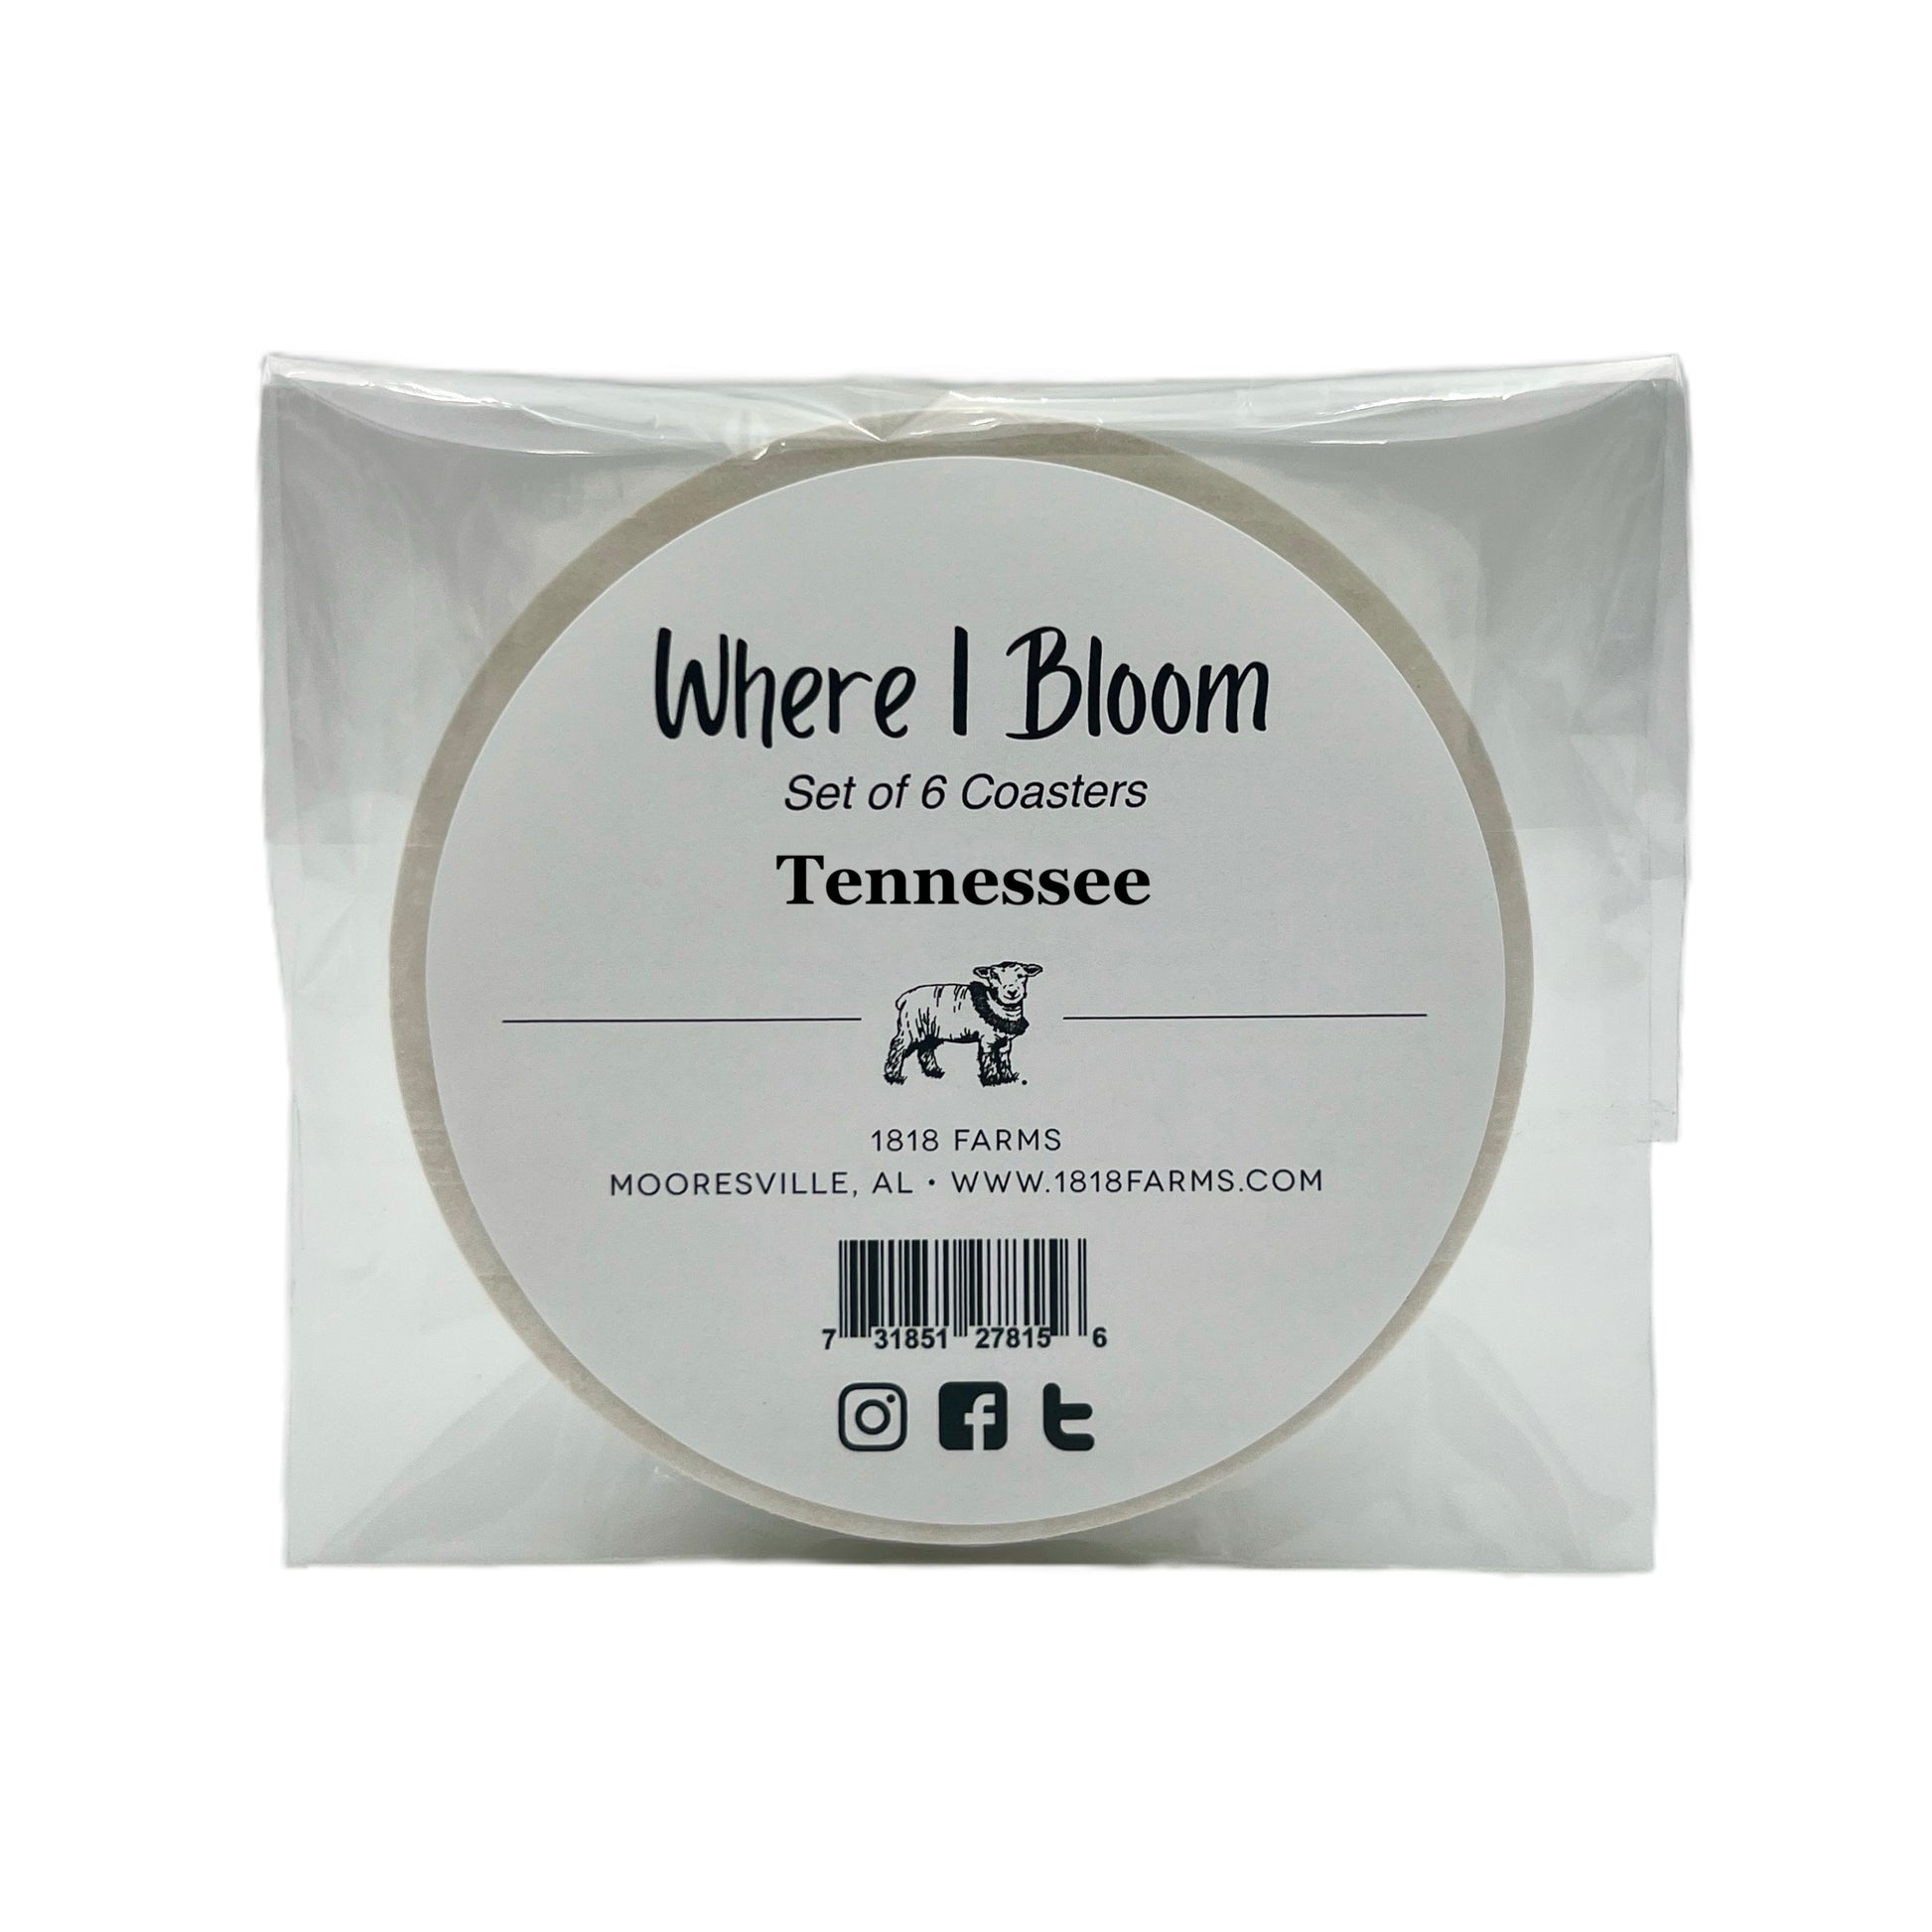 Tennessee Themed Coasters (Set of 6)  - "Where I Bloom" Collection Coaster 1818 Farms   